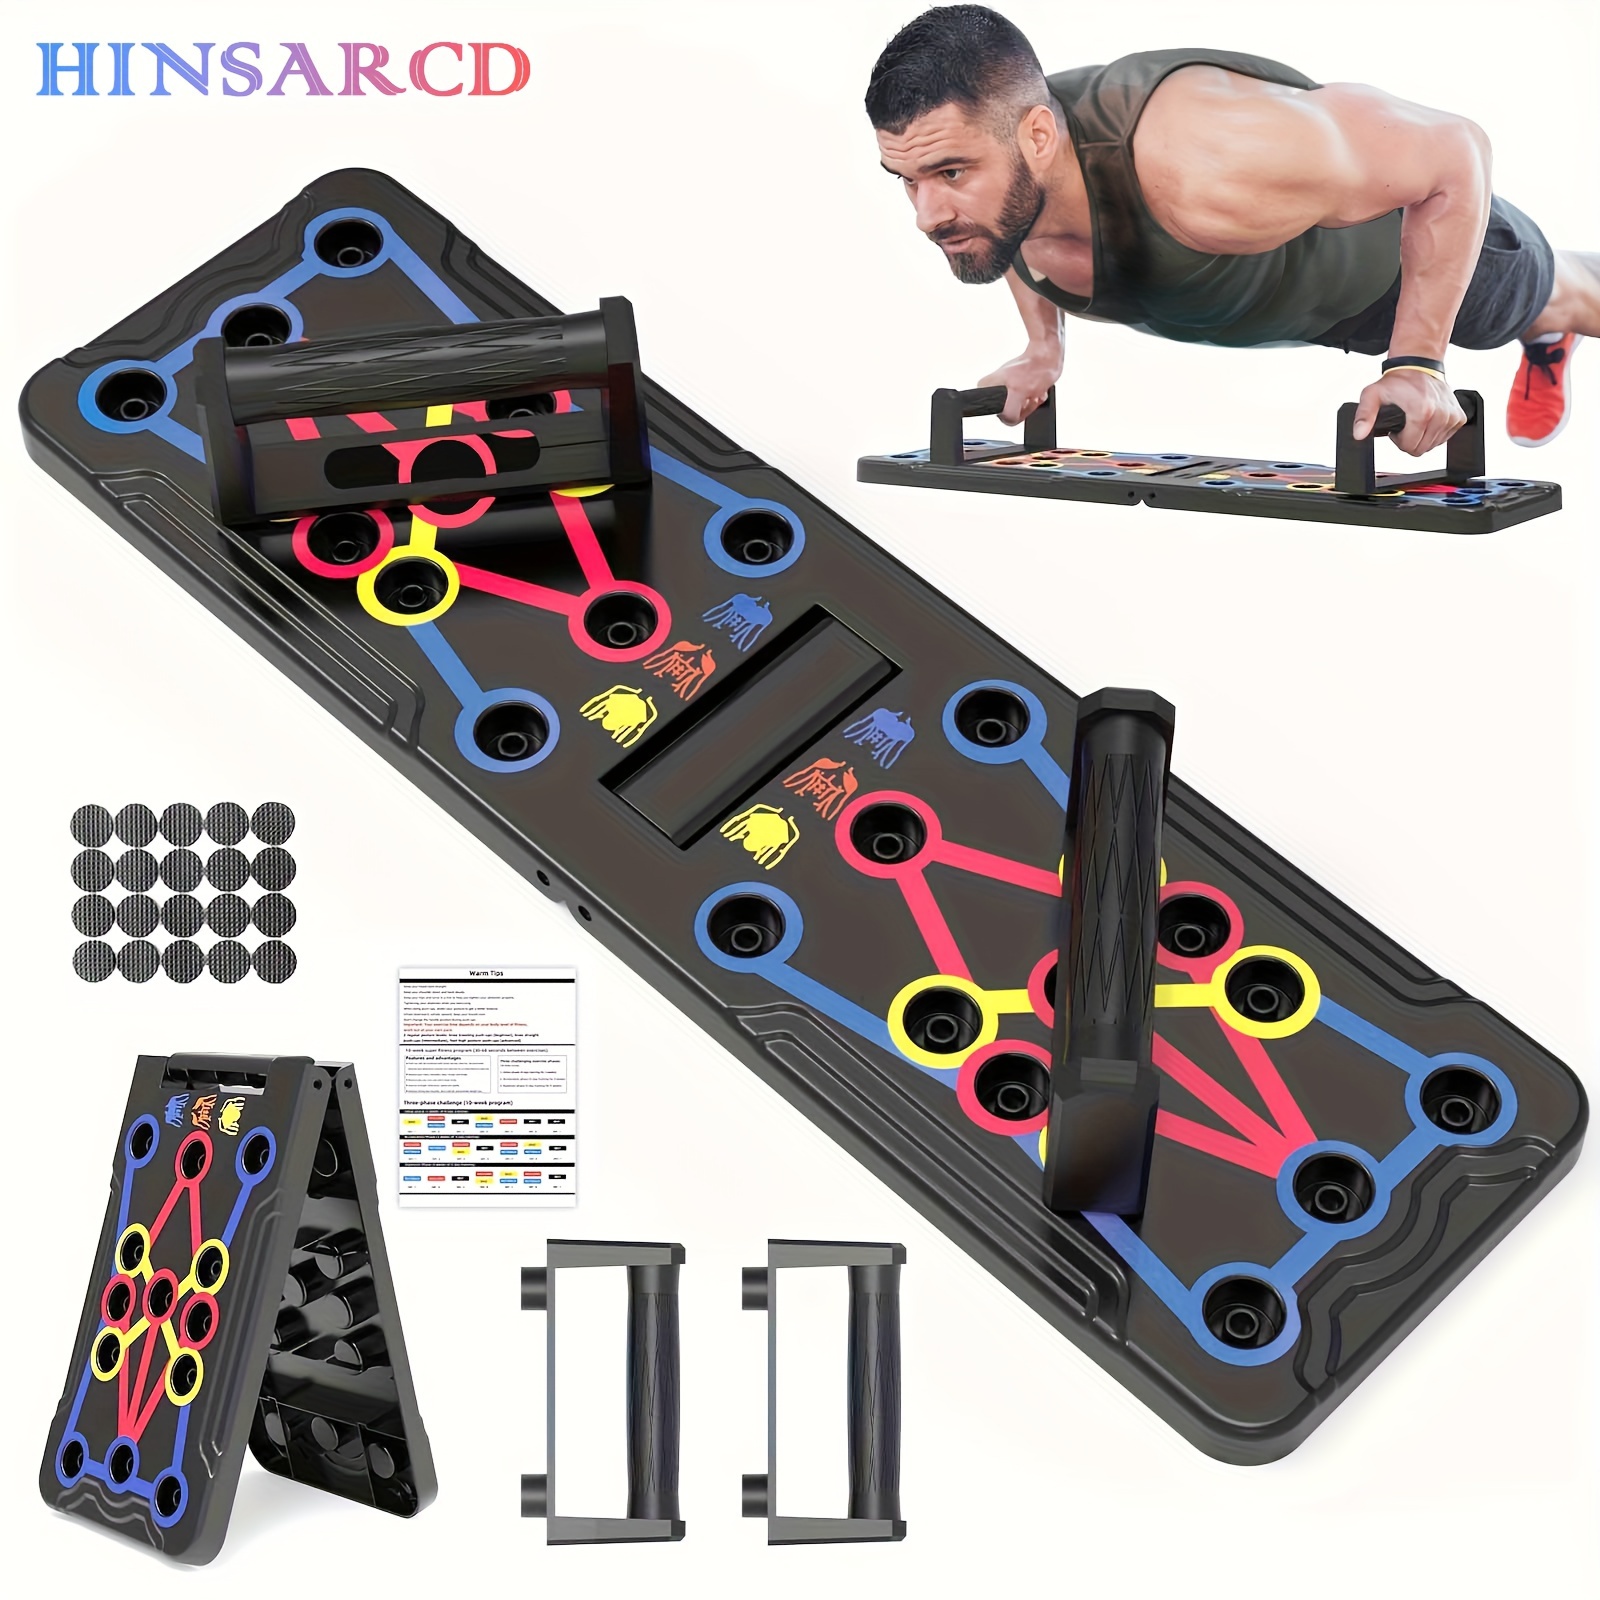 TESISTANCE Large Push Up Board for Men & Women, Perfect Push Up Bars for  Strength Training, Multi-Function Workout Equipment Home Gym, Foldable  Pushup